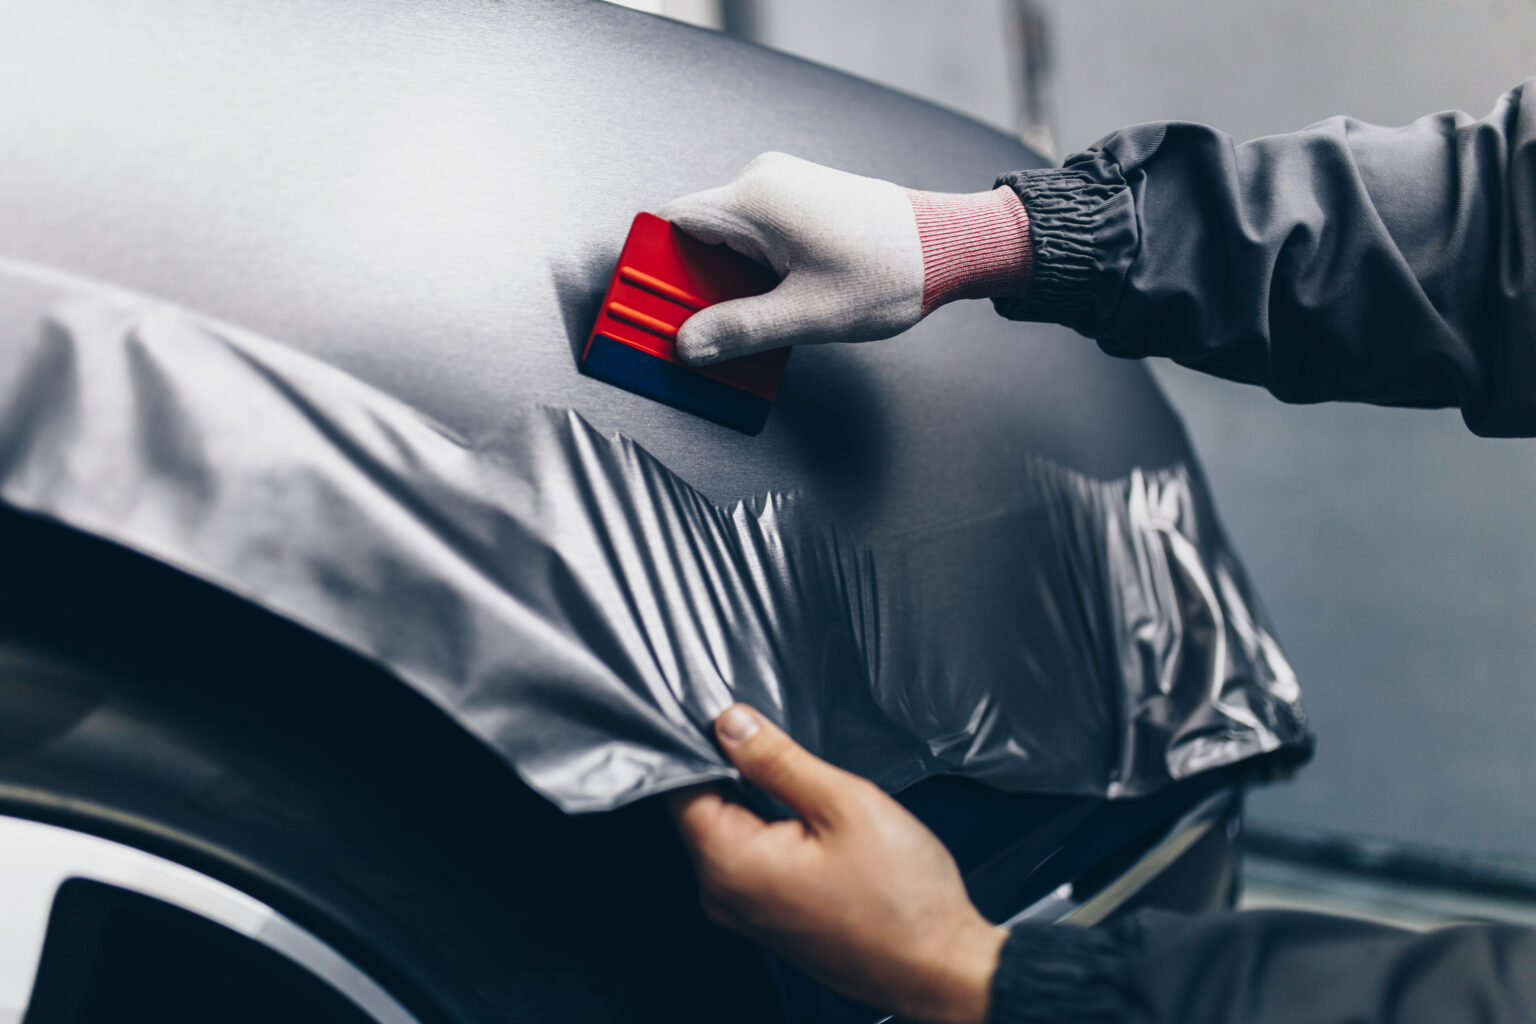 A person applies a vehicle wrap with a red tool.